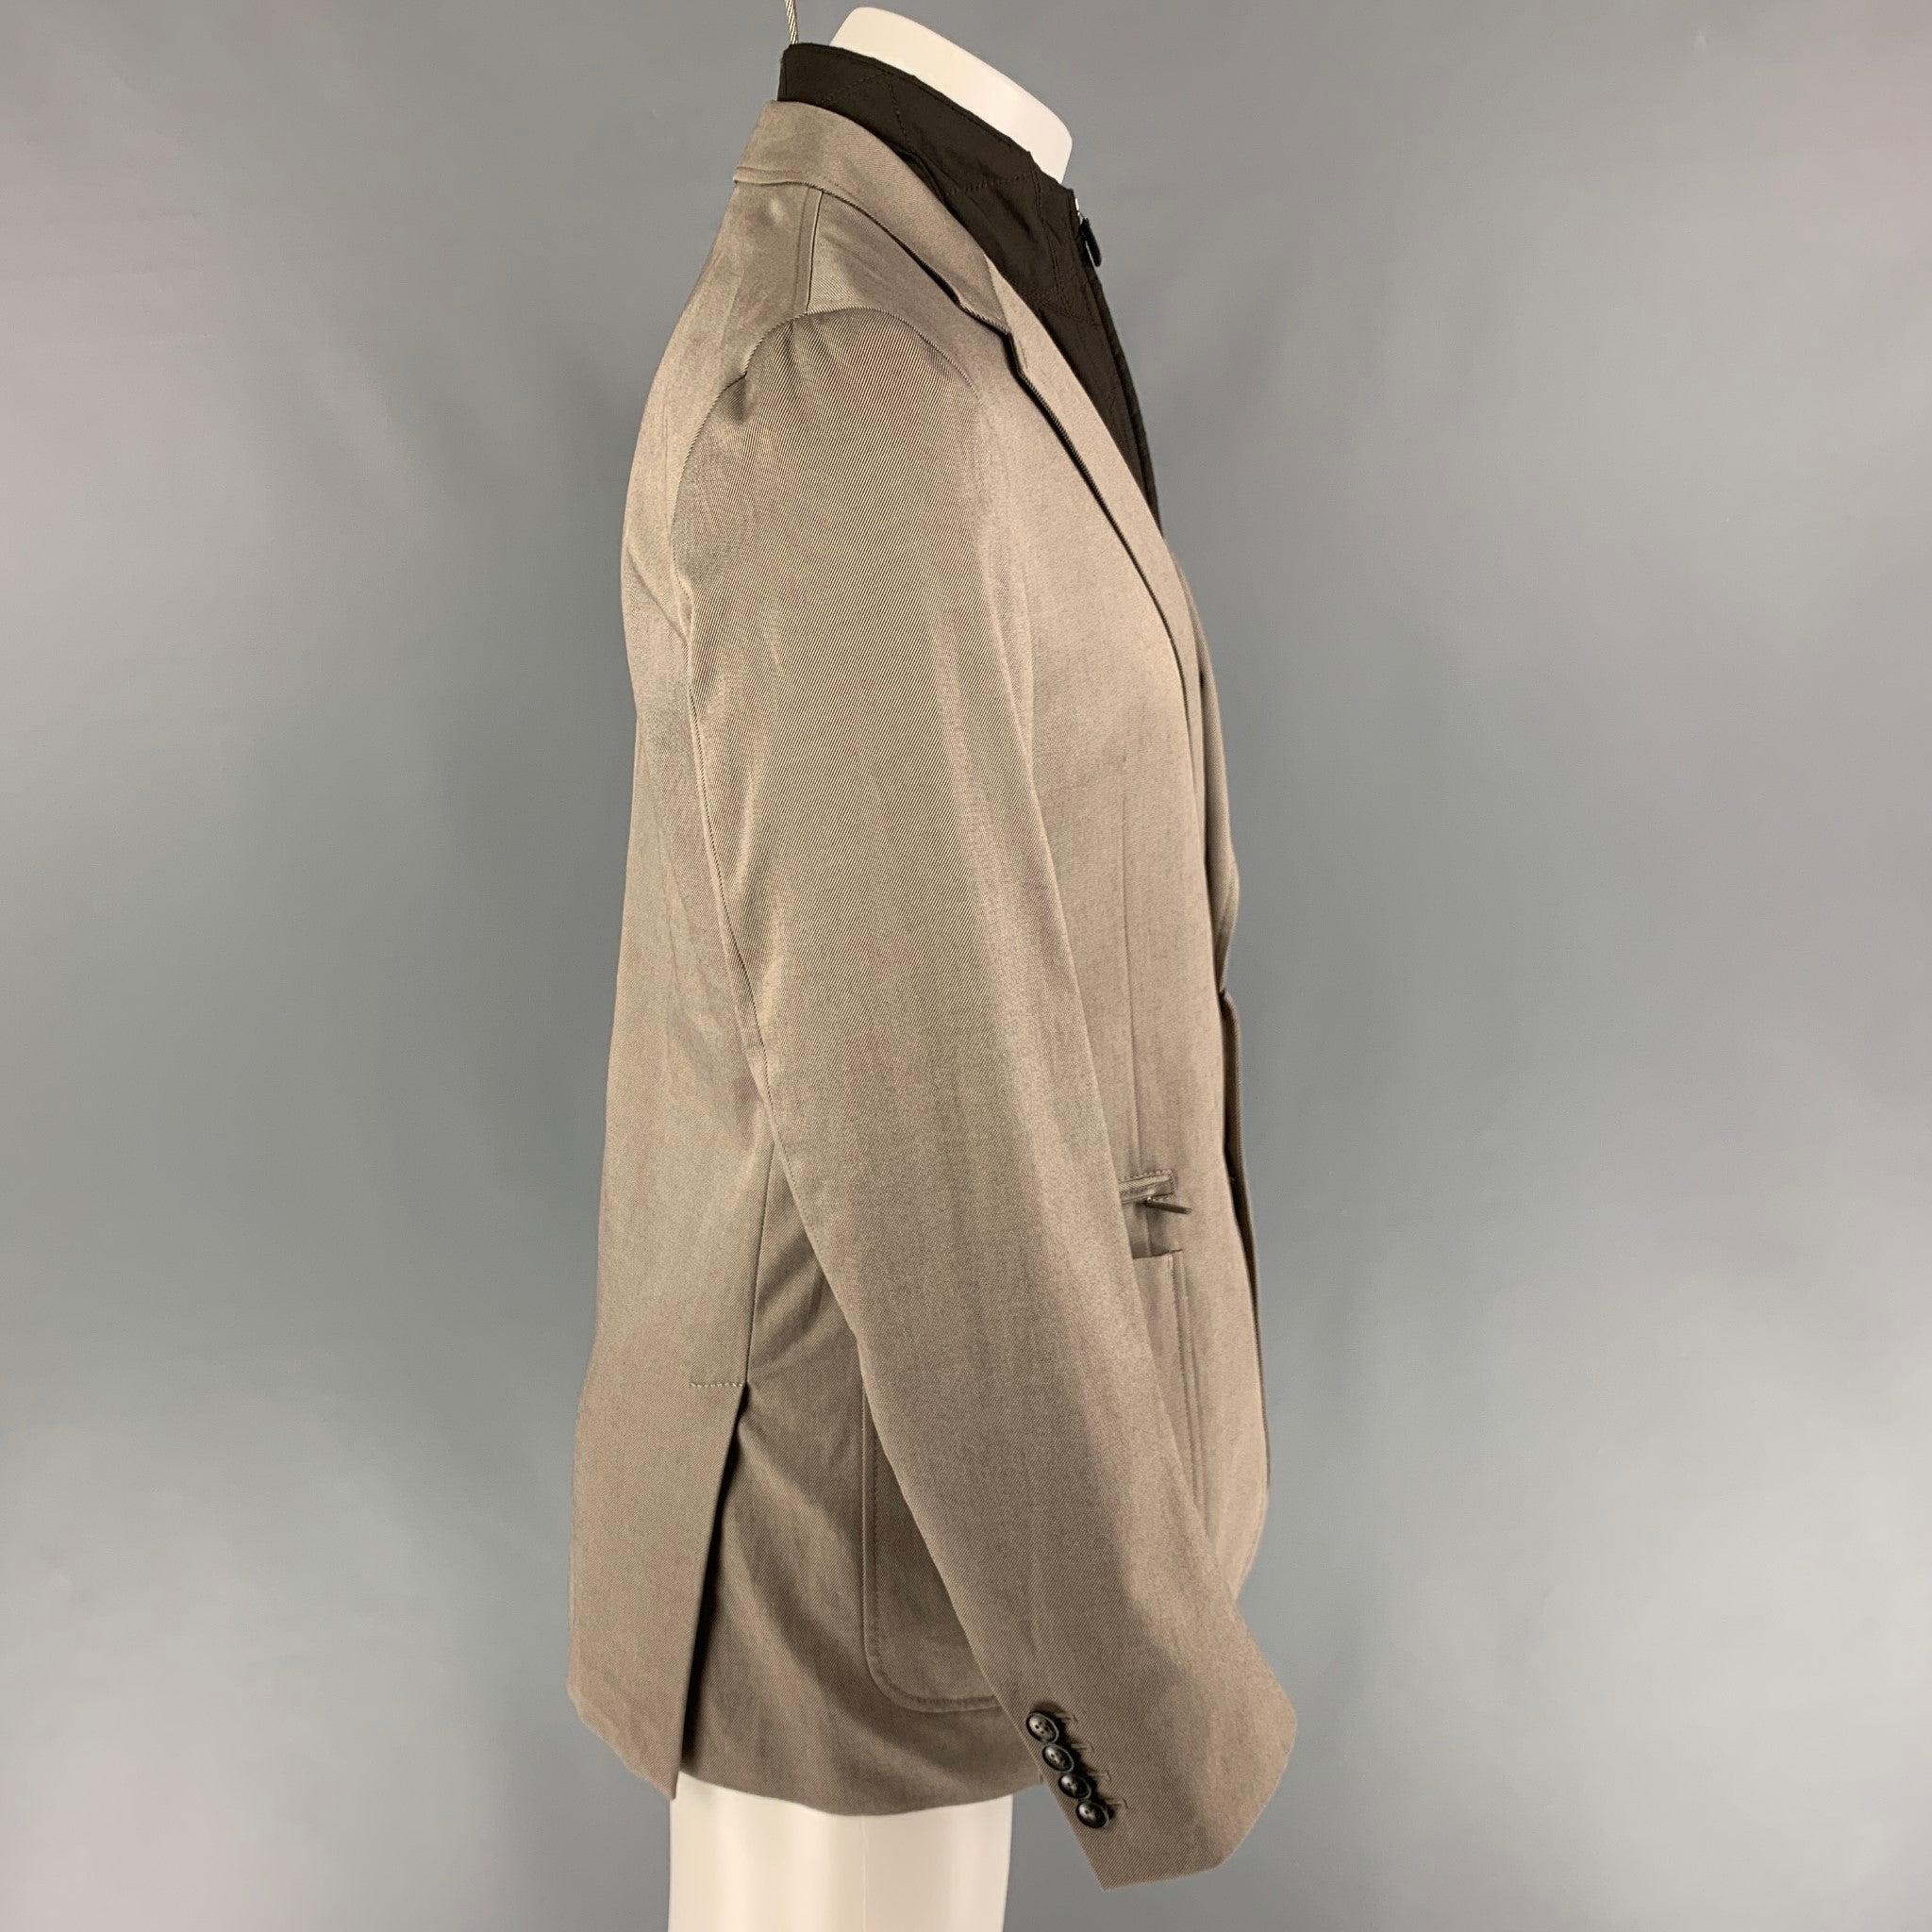 ERMENEGILDO ZEGNA sport coat comes in a khaki cotton / cashmere featuring a detachable vest panel, notch lapel, patch pockets, and a double button closure.
New With Tags. 

Marked:   50 

Measurements: 
 
Shoulder: 18 inches  Chest:
40 inches 